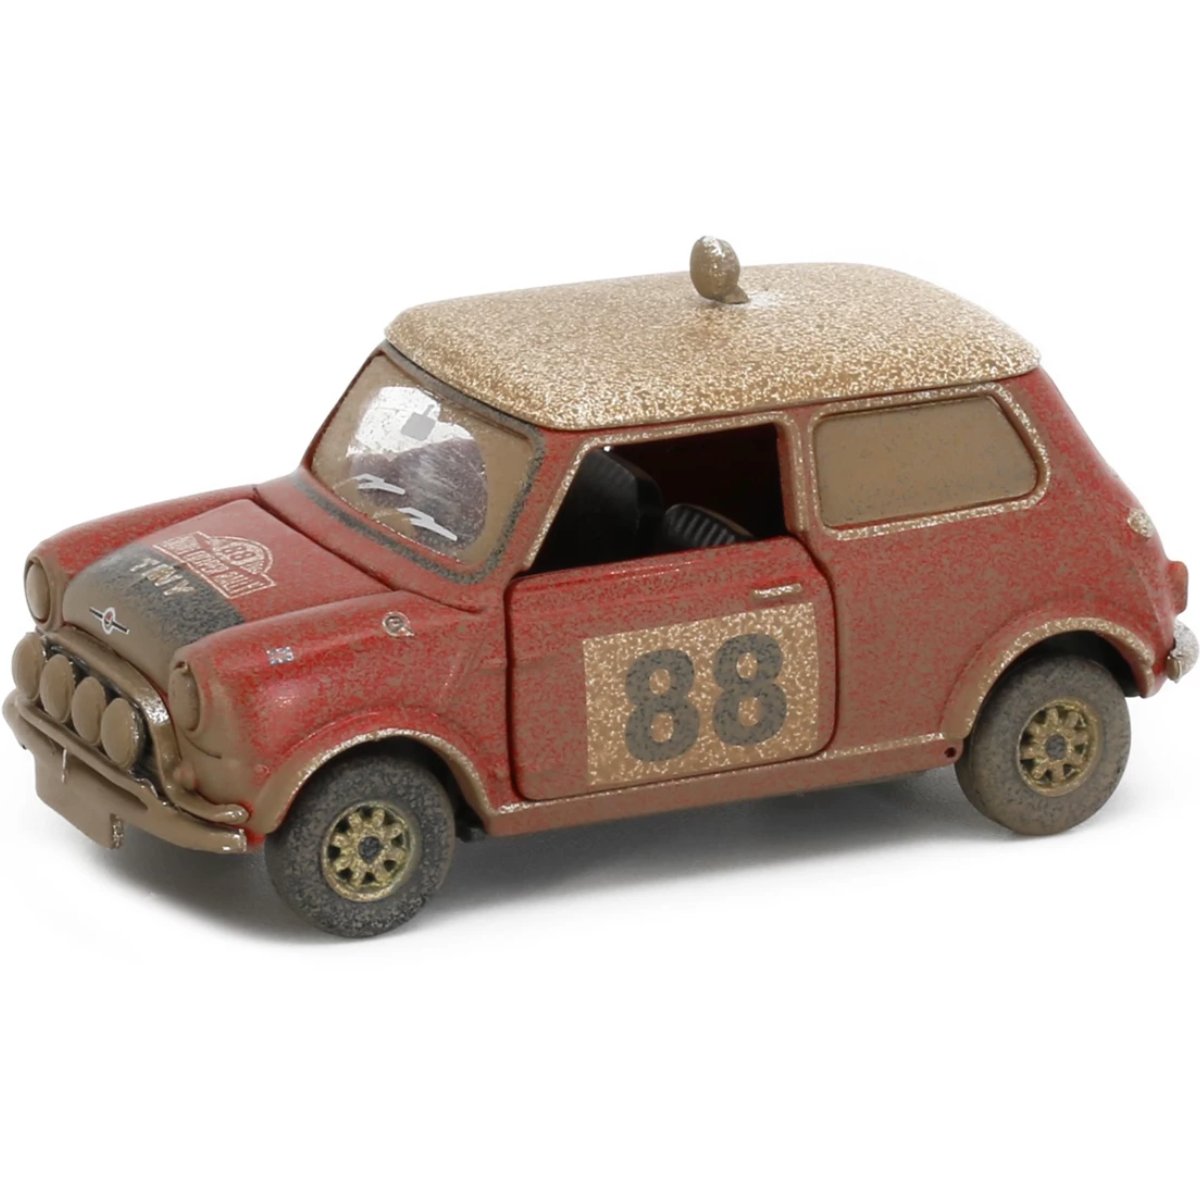 Tiny Models Mini Cooper Rally #88 Mud Weathered (1:50 Scale) - Phillips Hobbies